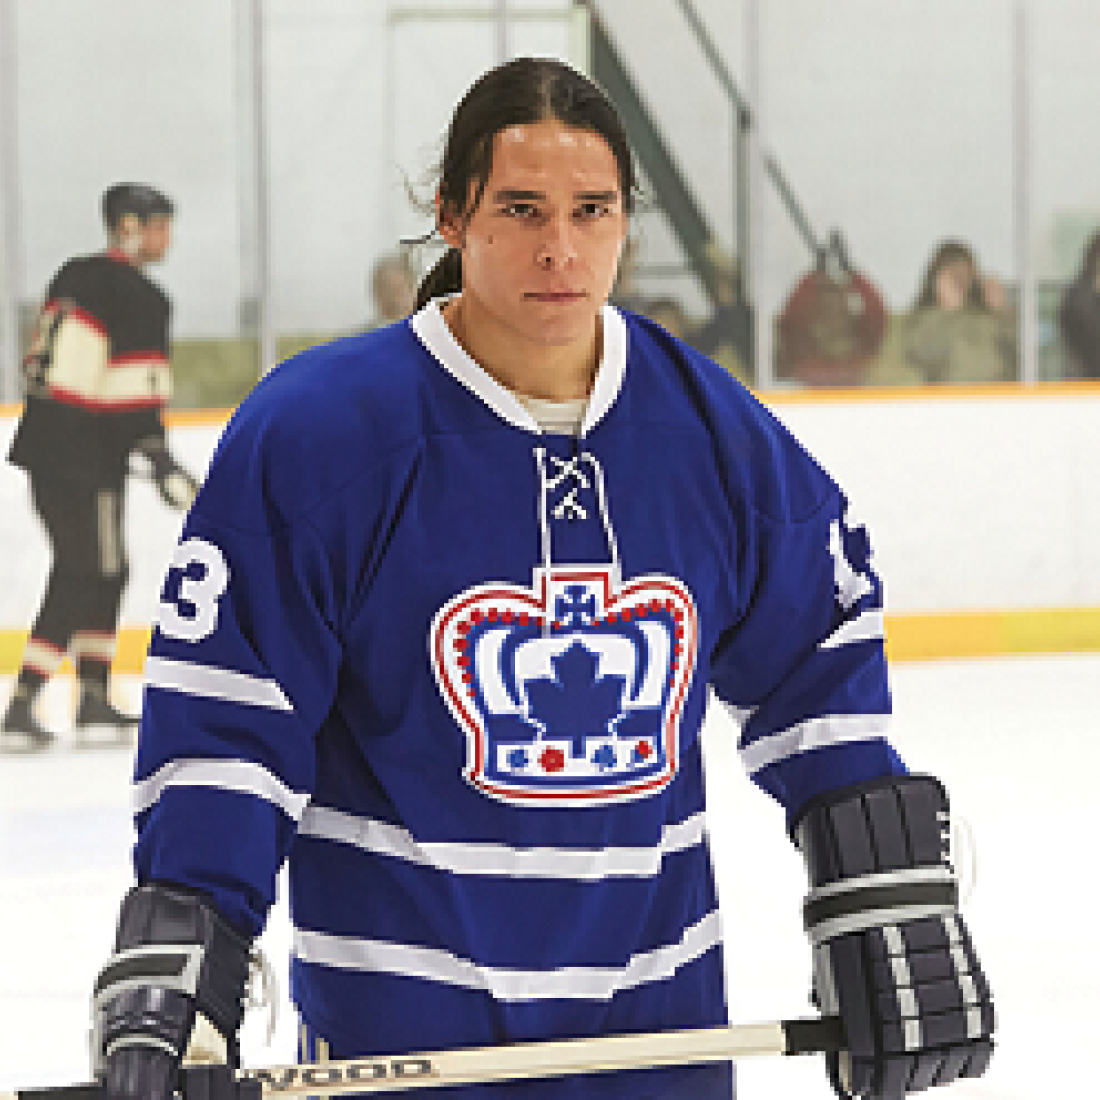 Indian Horse movie promo of young adult male hockey player in a rink